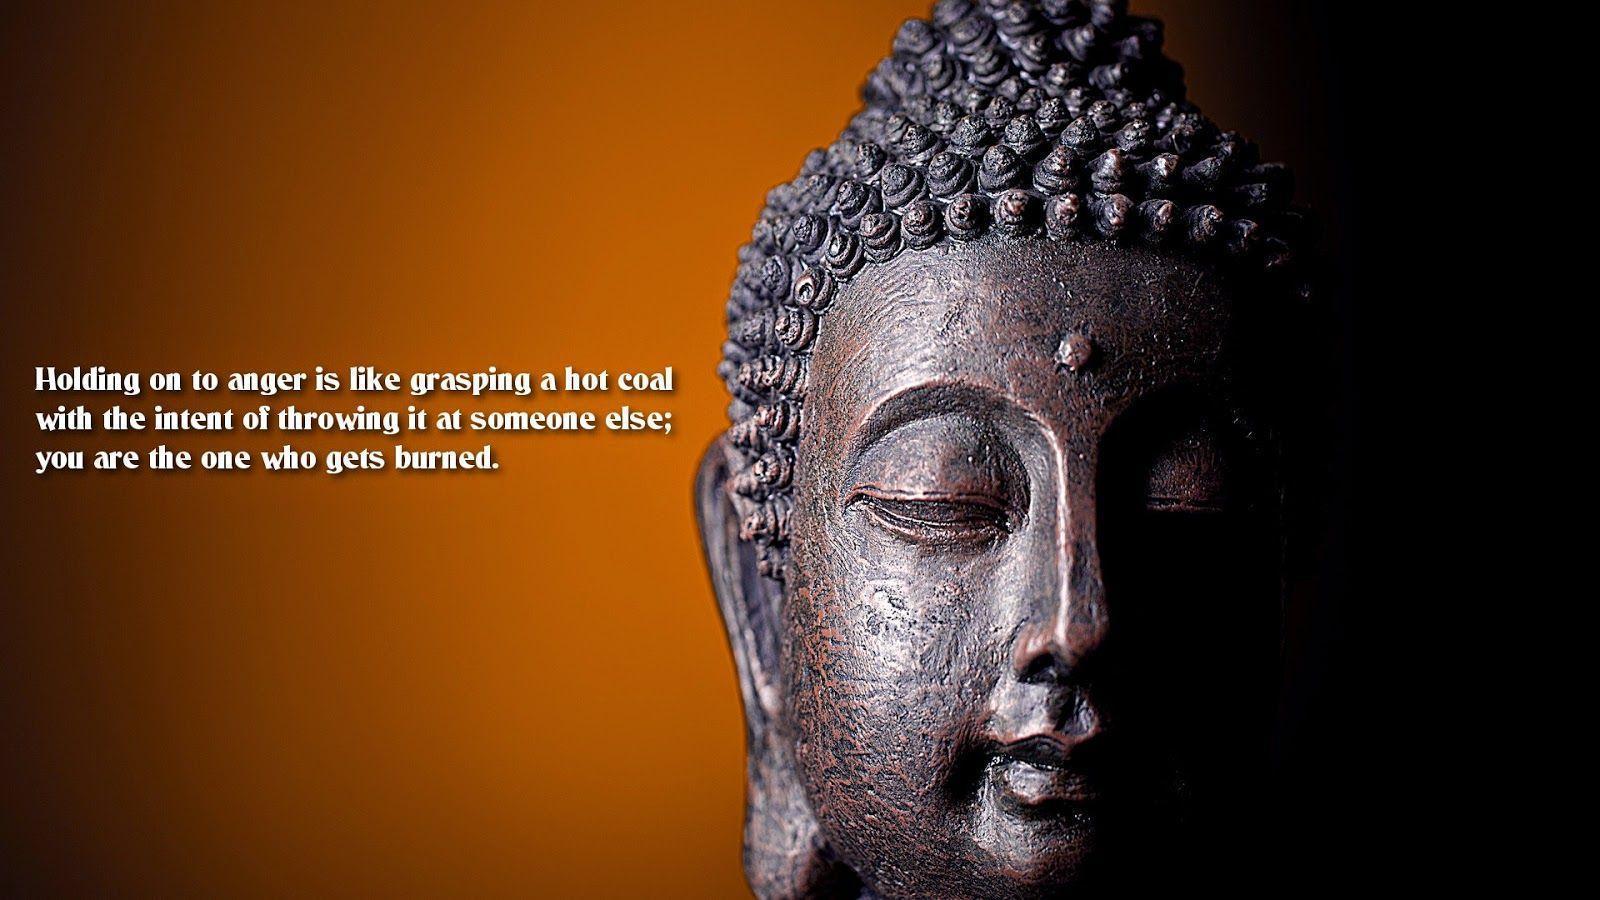 Buddha wallpaper with quotes on life and happiness HD picture